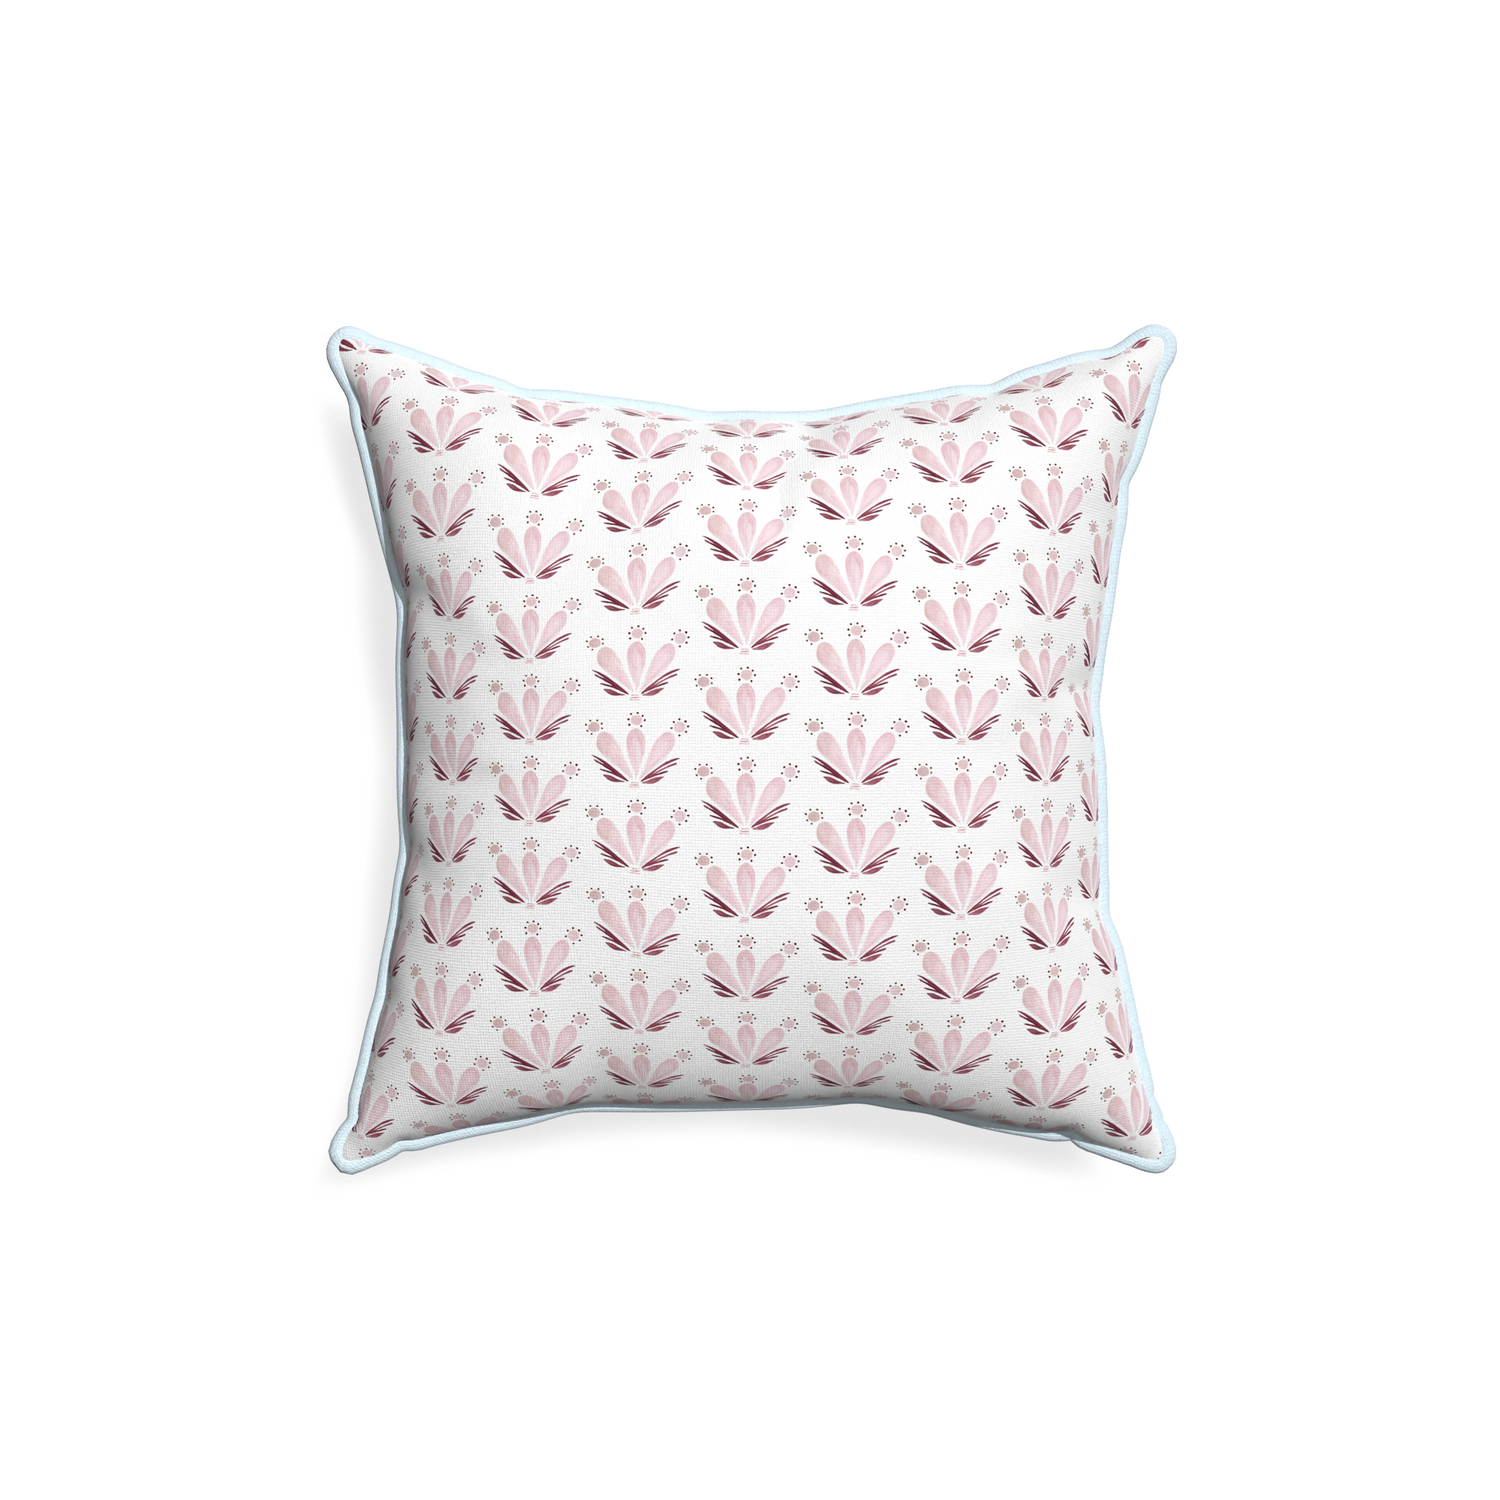 18-square serena pink custom pink & burgundy drop repeat floralpillow with powder piping on white background